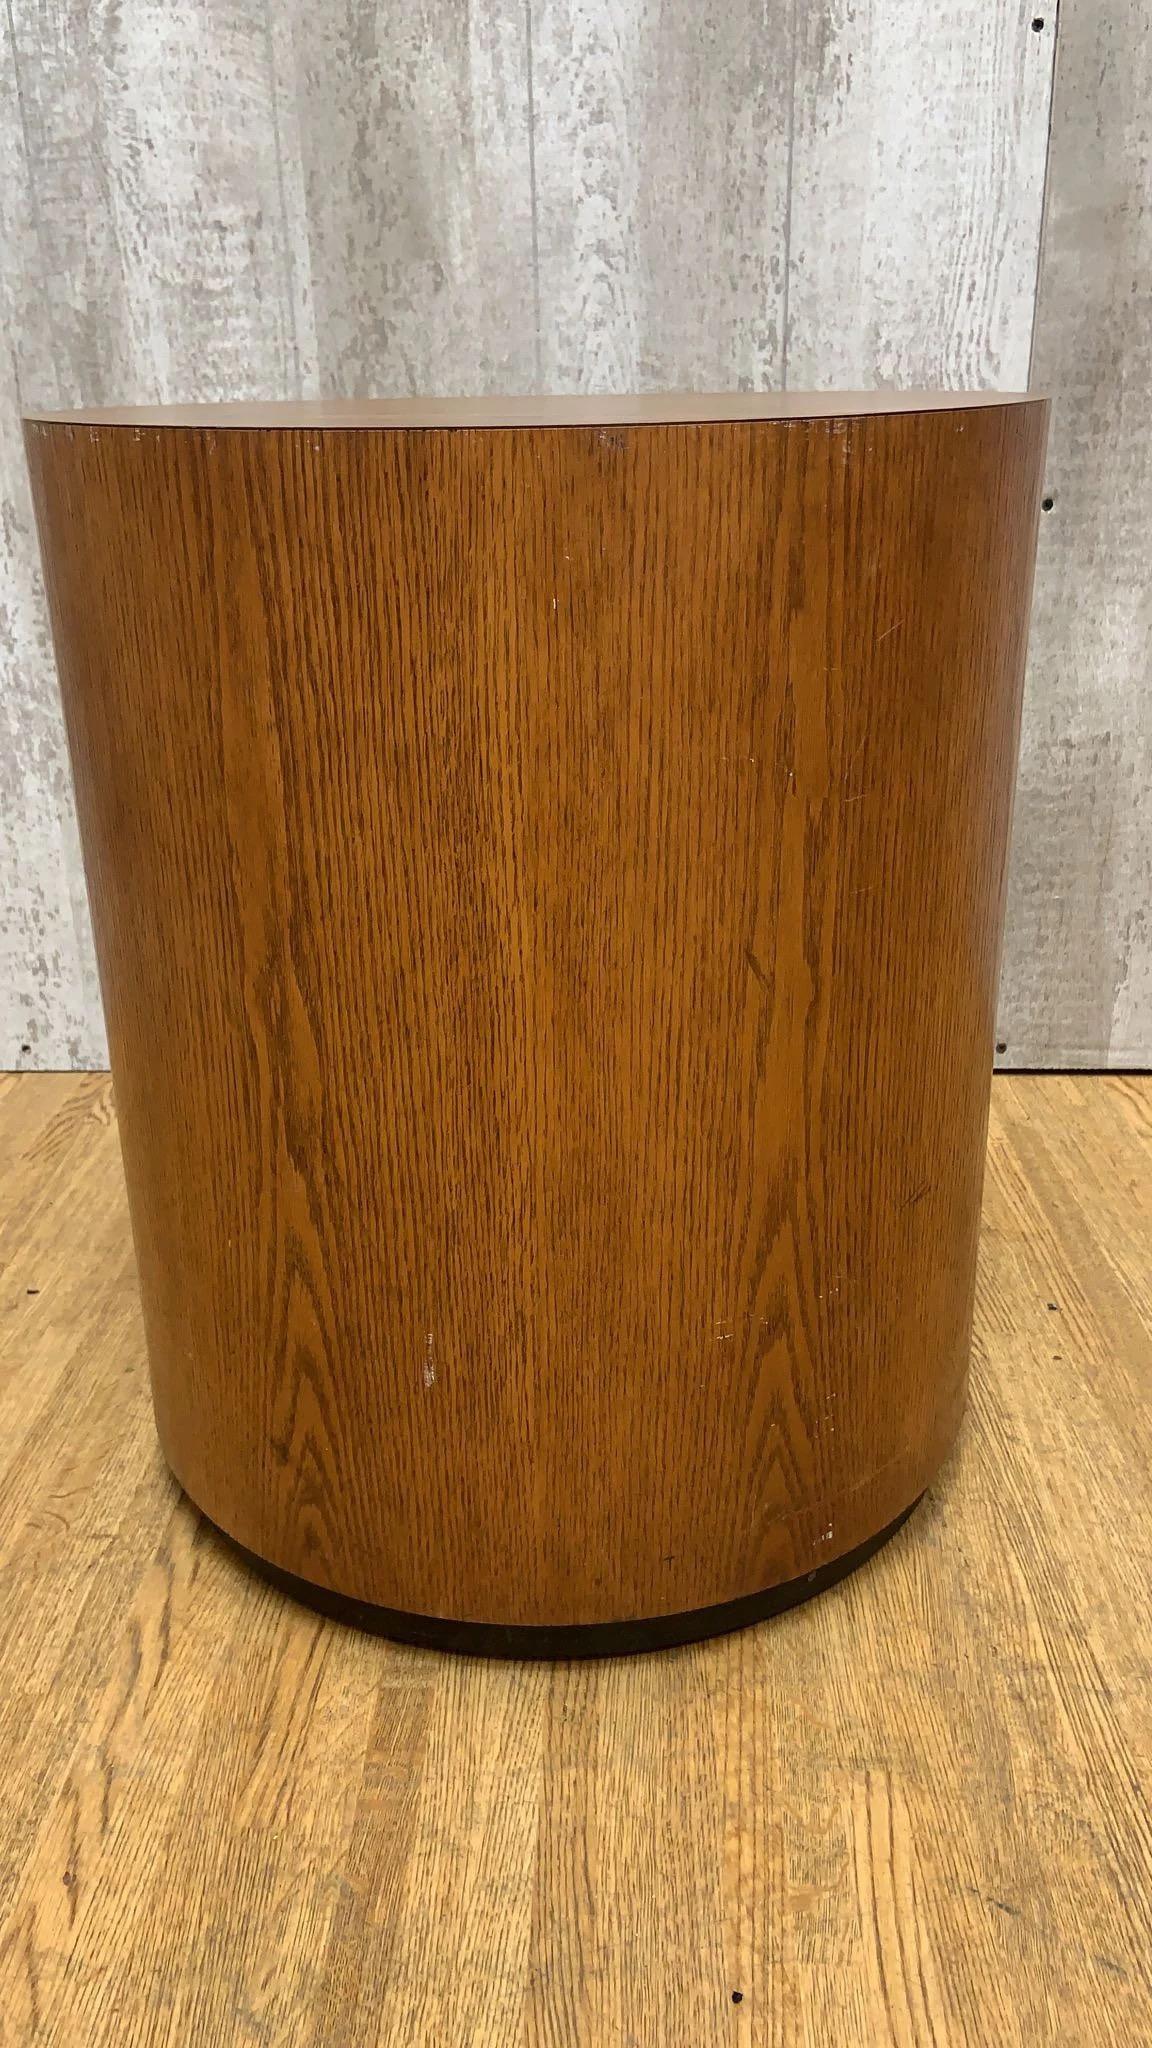 Vintage Mid Century Modern Round Cylinder Drum Barrel Table  

Enhance your living space with our Mid Century Modern round cylinder drum barrel table, a stylish and versatile piece that will complement any decor. The table has a beautiful wood grain